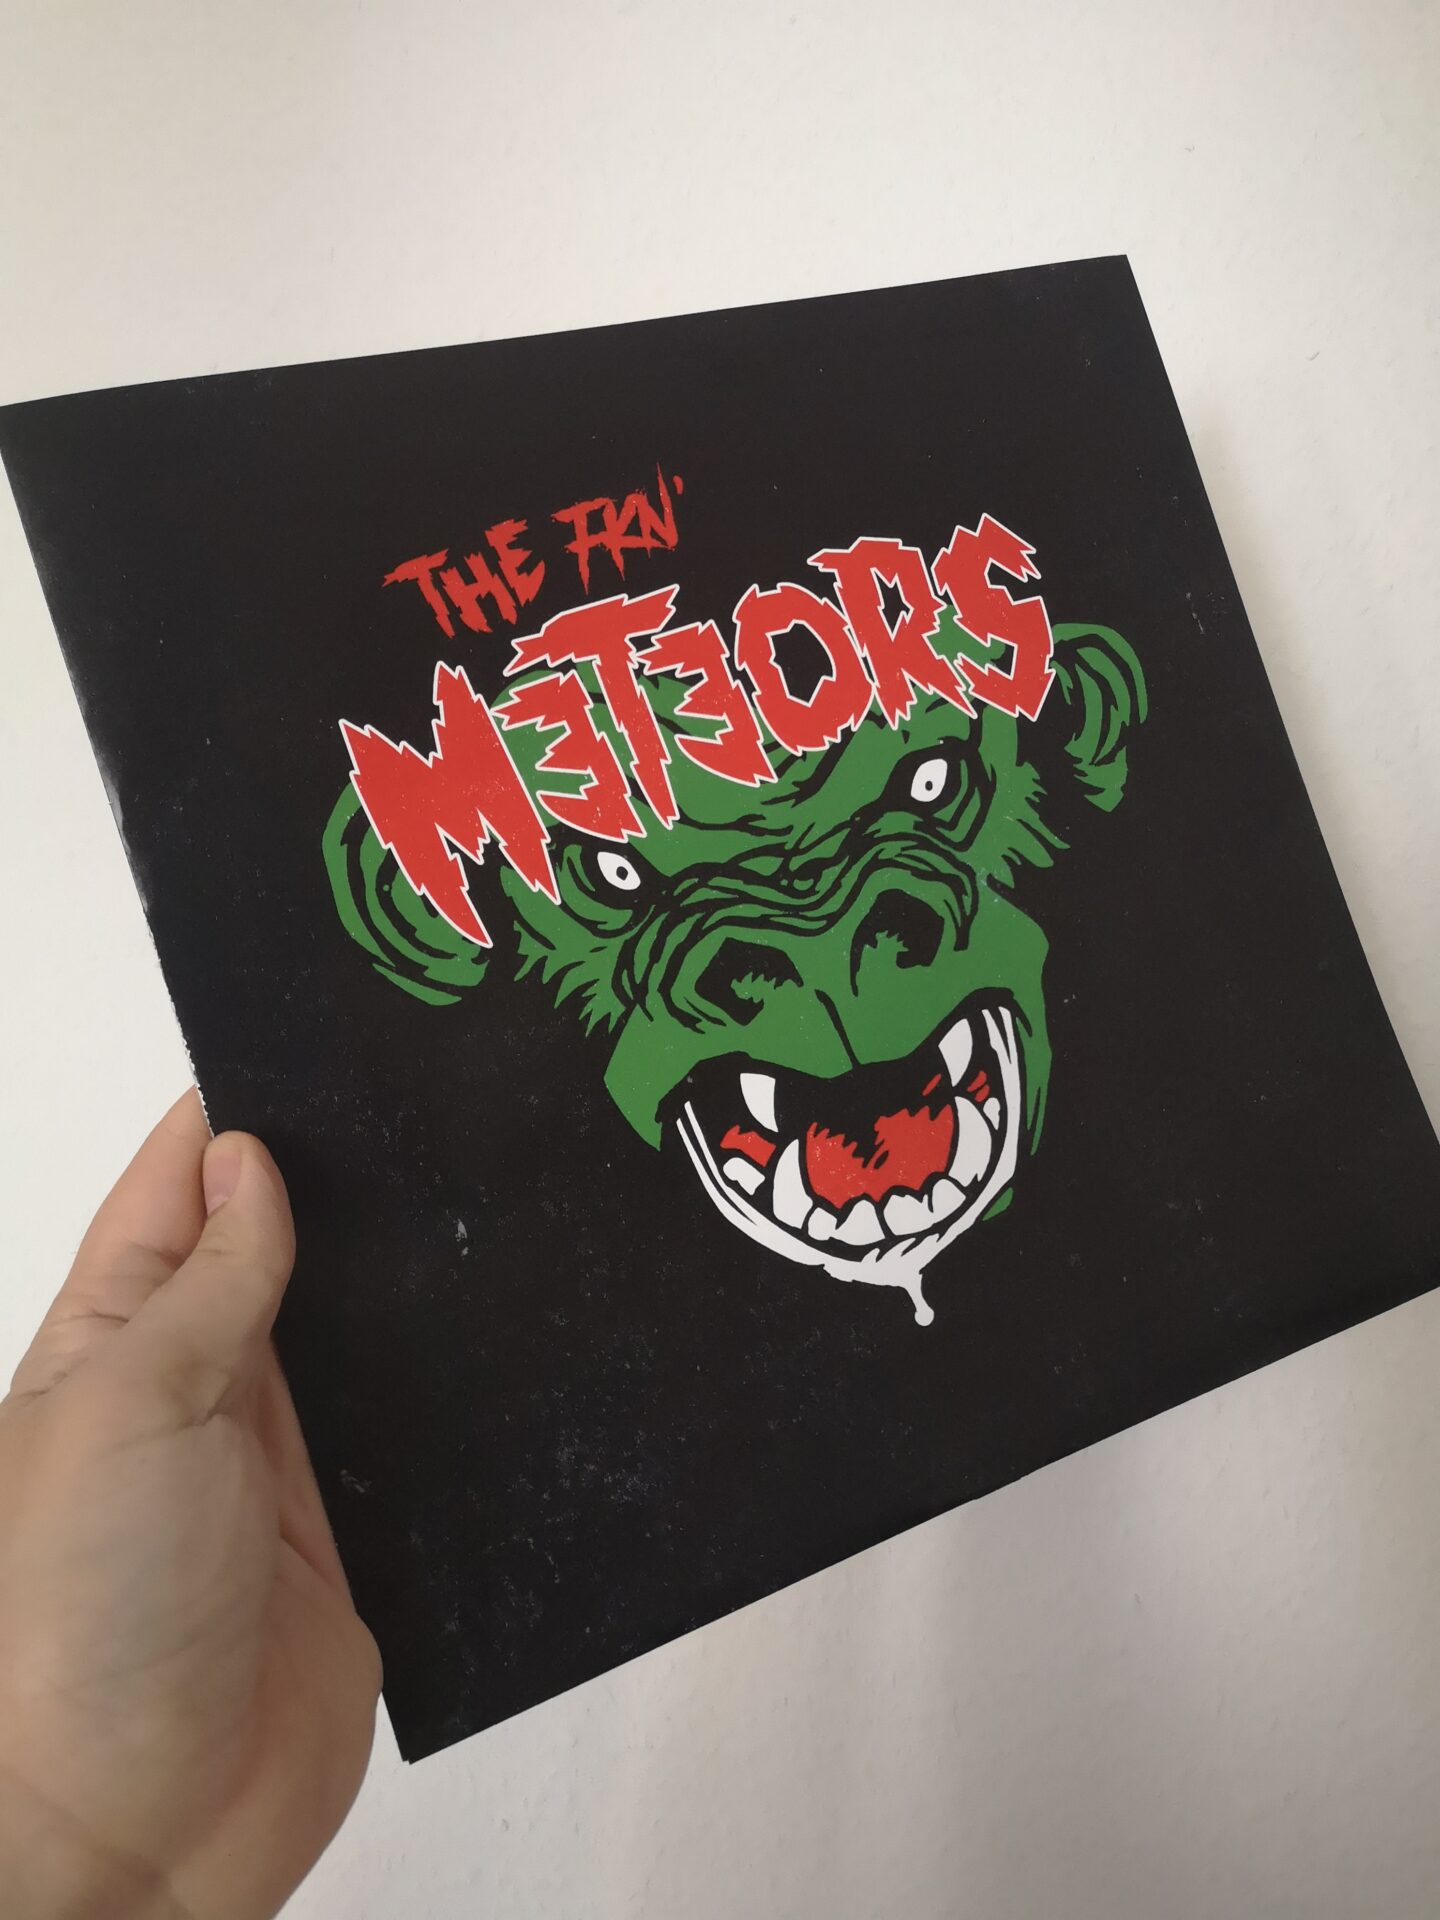 The Meteors - 40 days a rotting 2